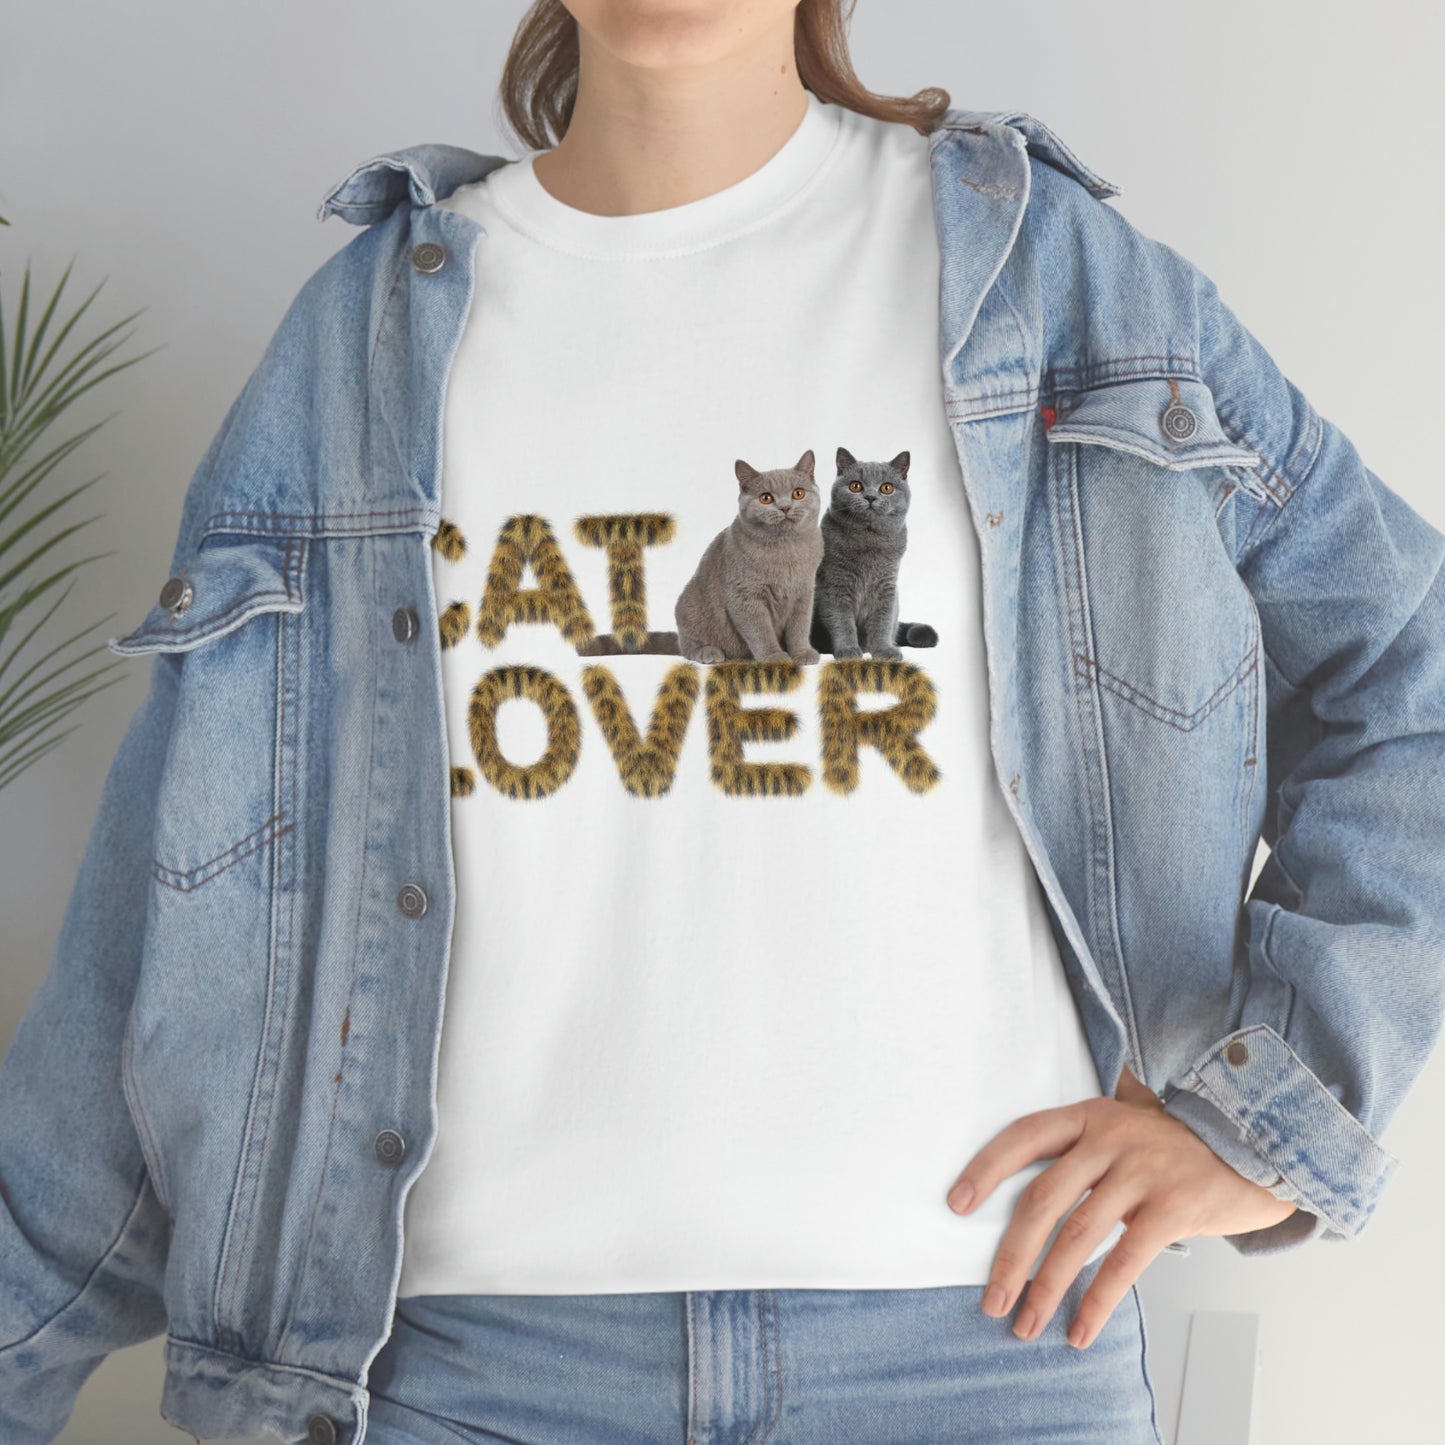 Cat Lover Two Cats together Graphic tee shirt